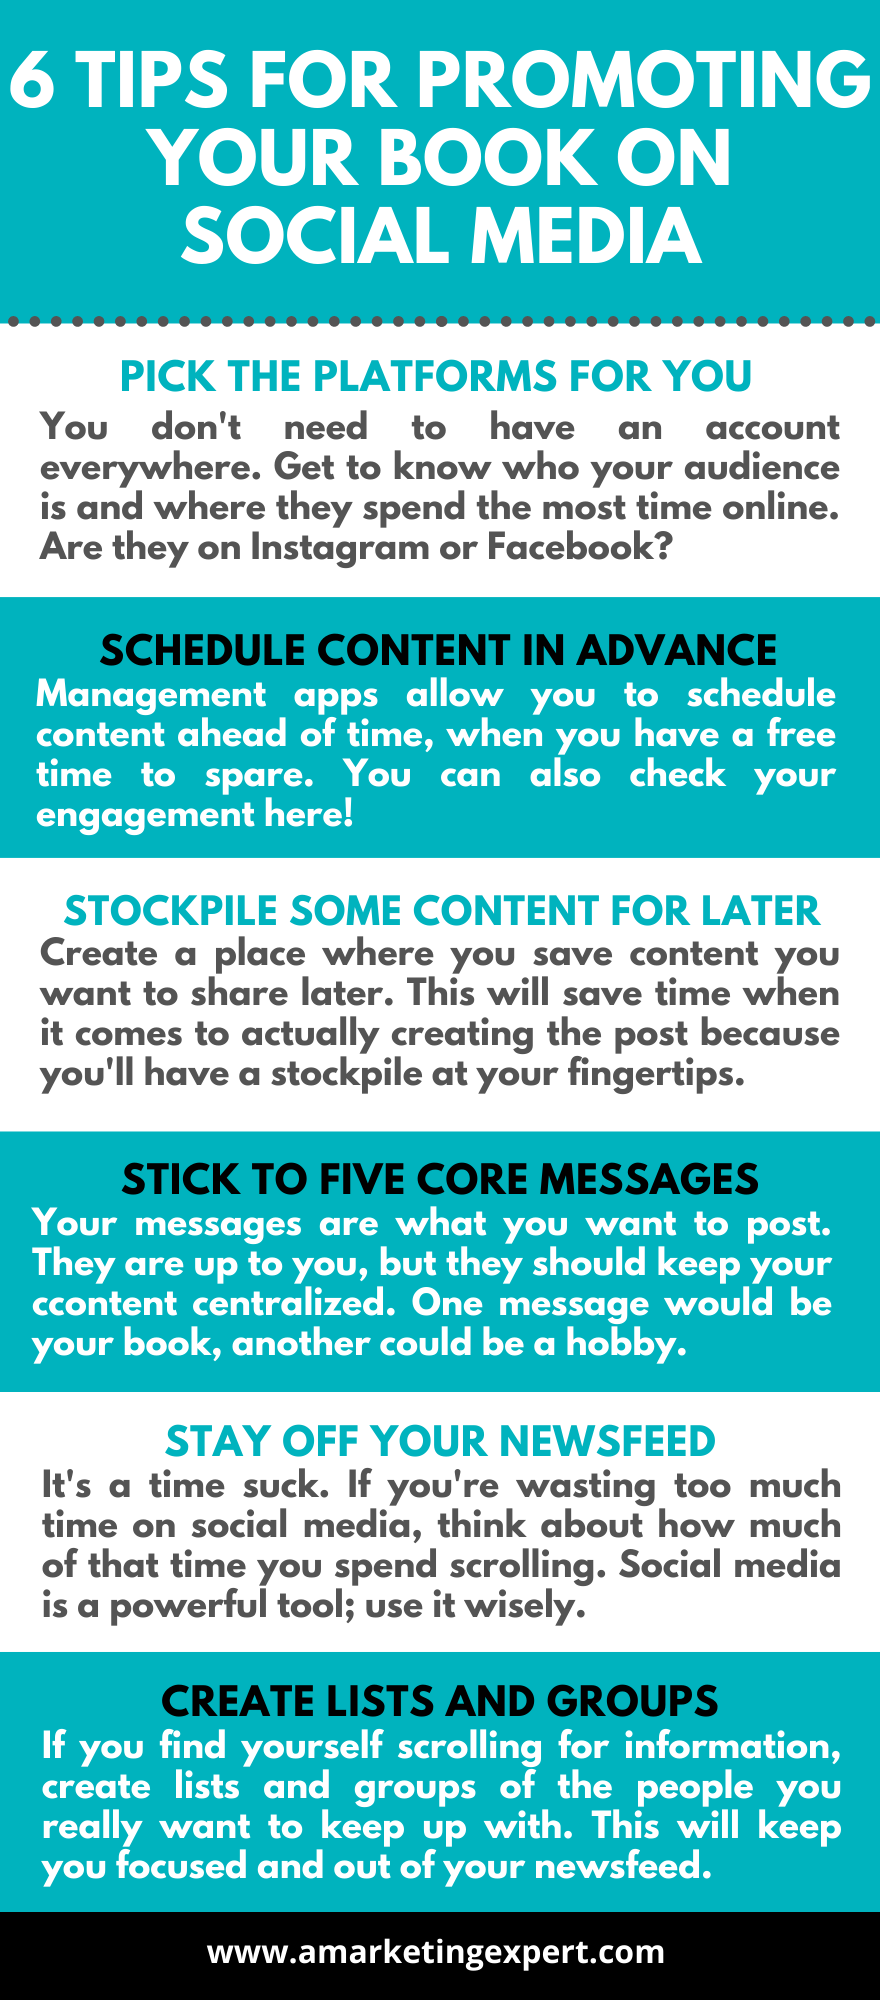 6-tips-for-promoting-your-book-over-social-media